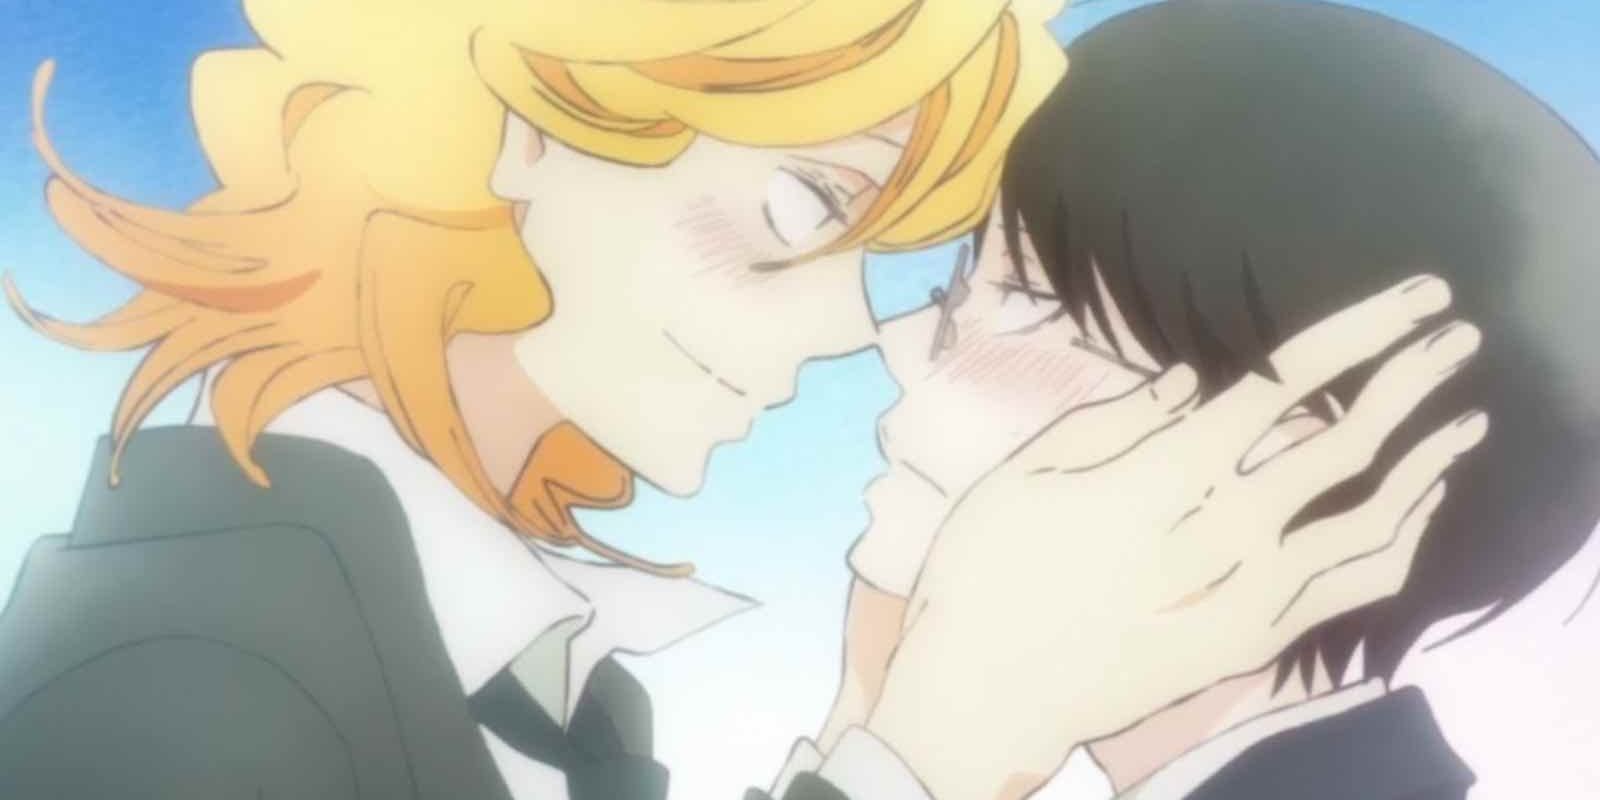 Hikaru Kusakabe cupping a blushing Rihito Saijou's face with his hands and smiling as their noses touch in Doukyuusei: Classmates